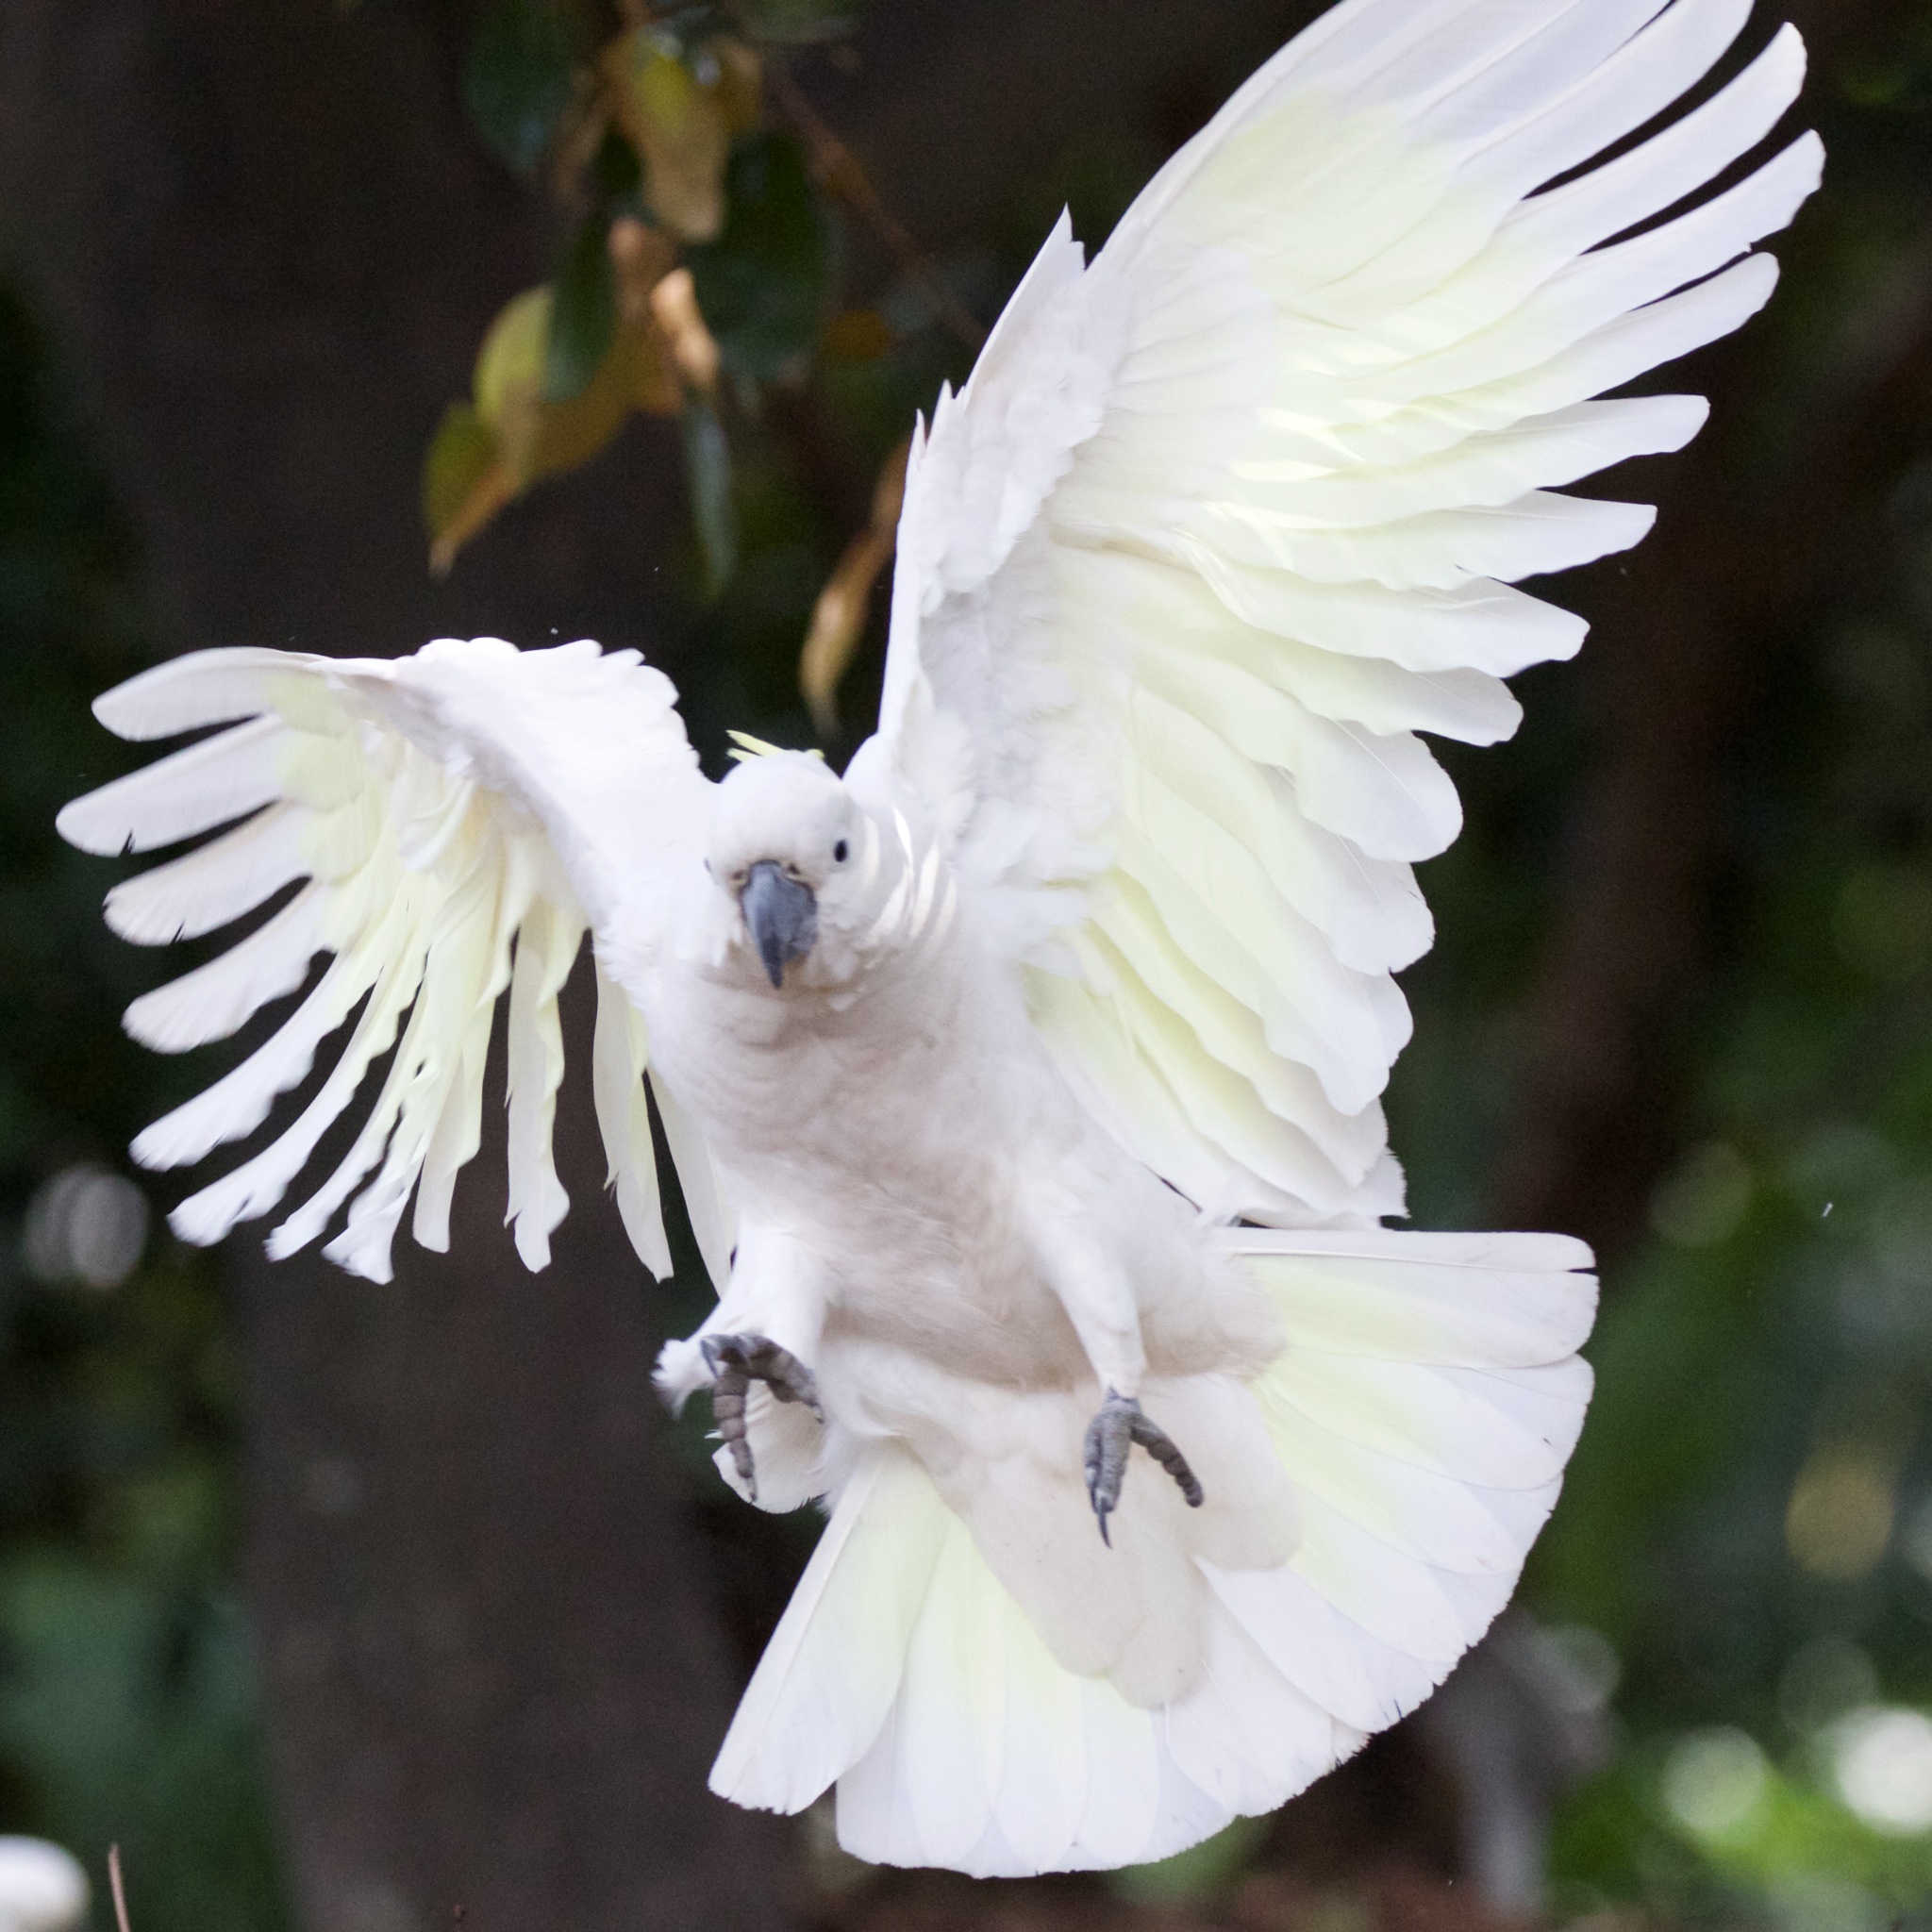 Cockatoo about to land